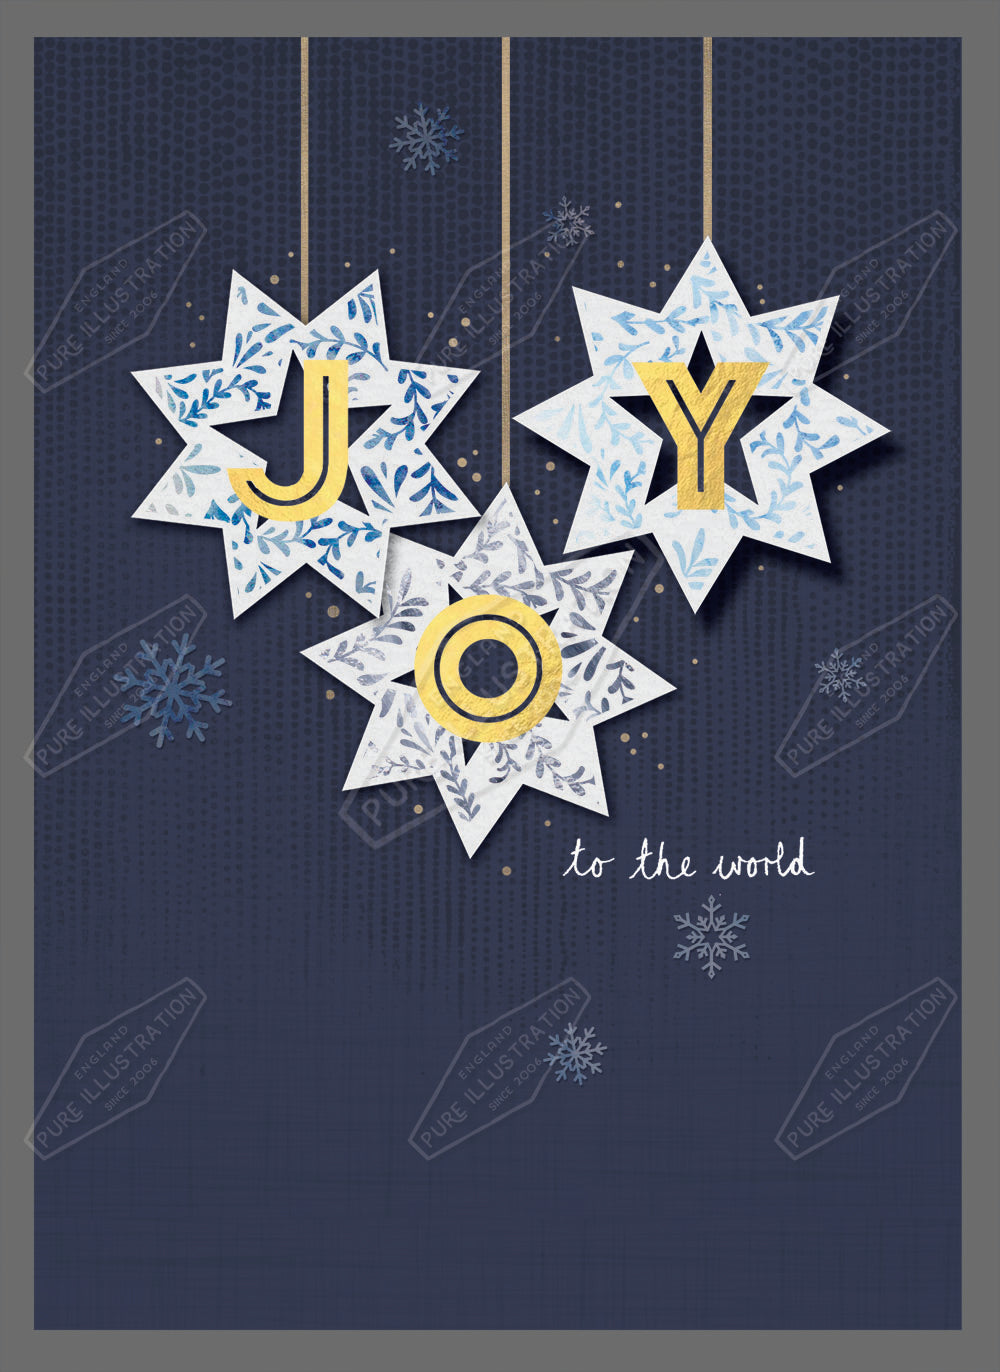 00032047SLA- Sarah Lake is represented by Pure Art Licensing Agency - Christmas Greeting Card Design